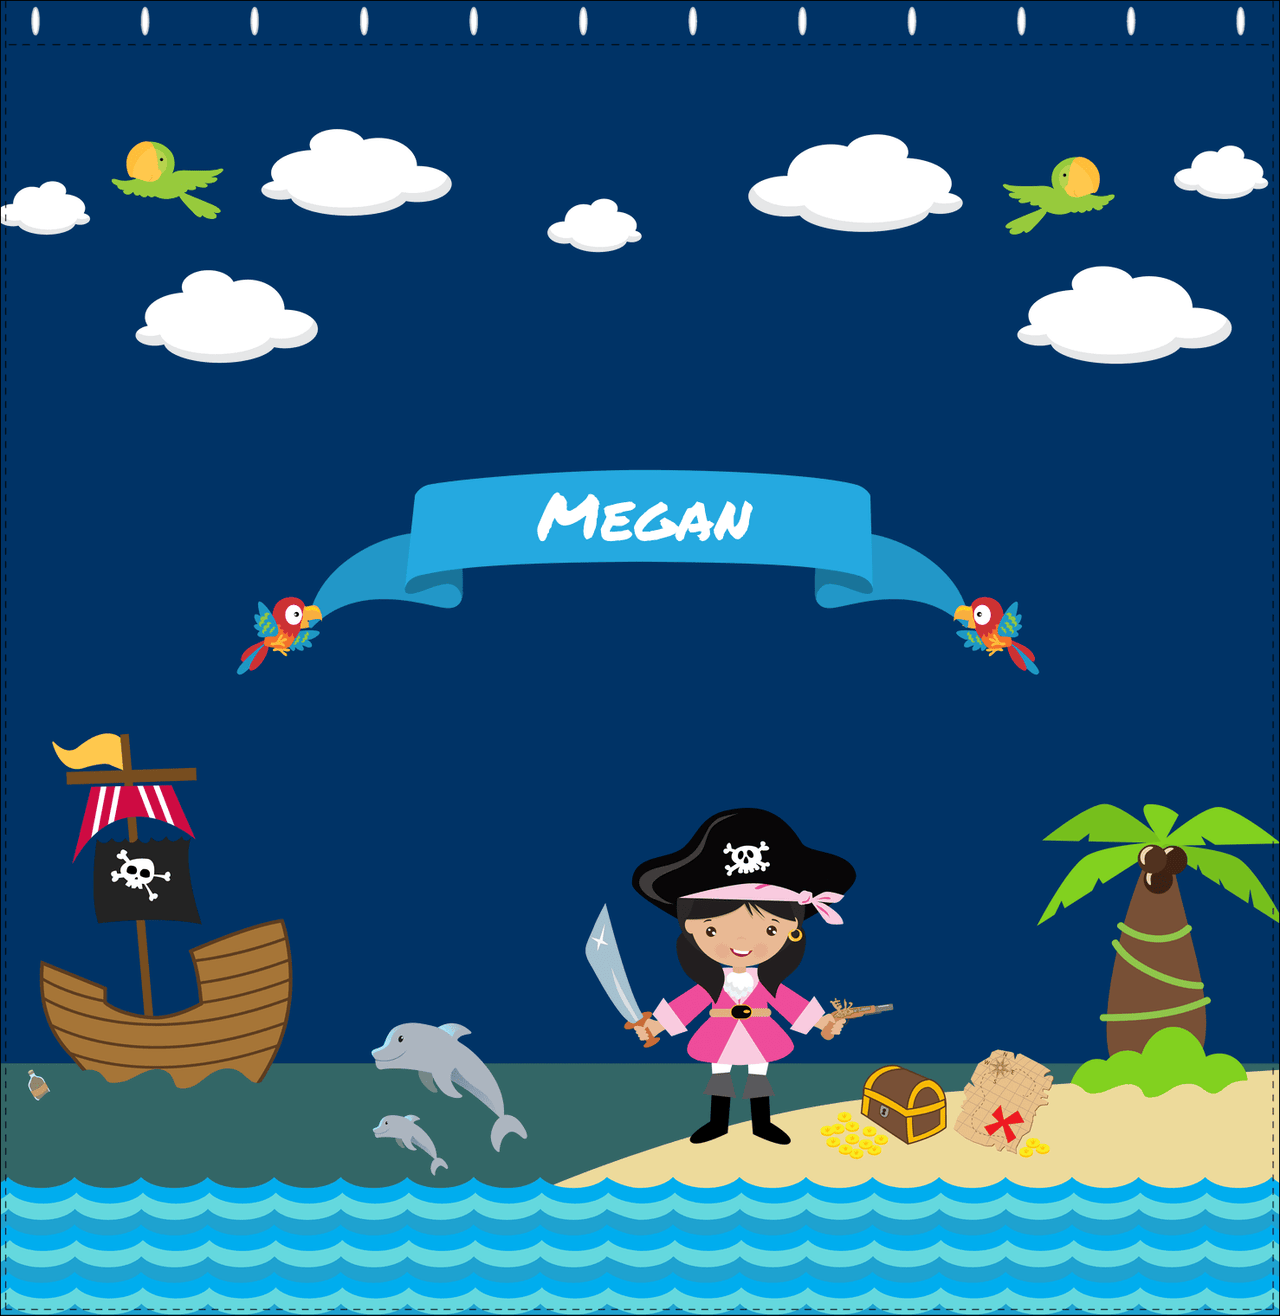 Personalized Pirate Shower Curtain II - Blue Background - Black Hair Girl with Sword - Decorate View